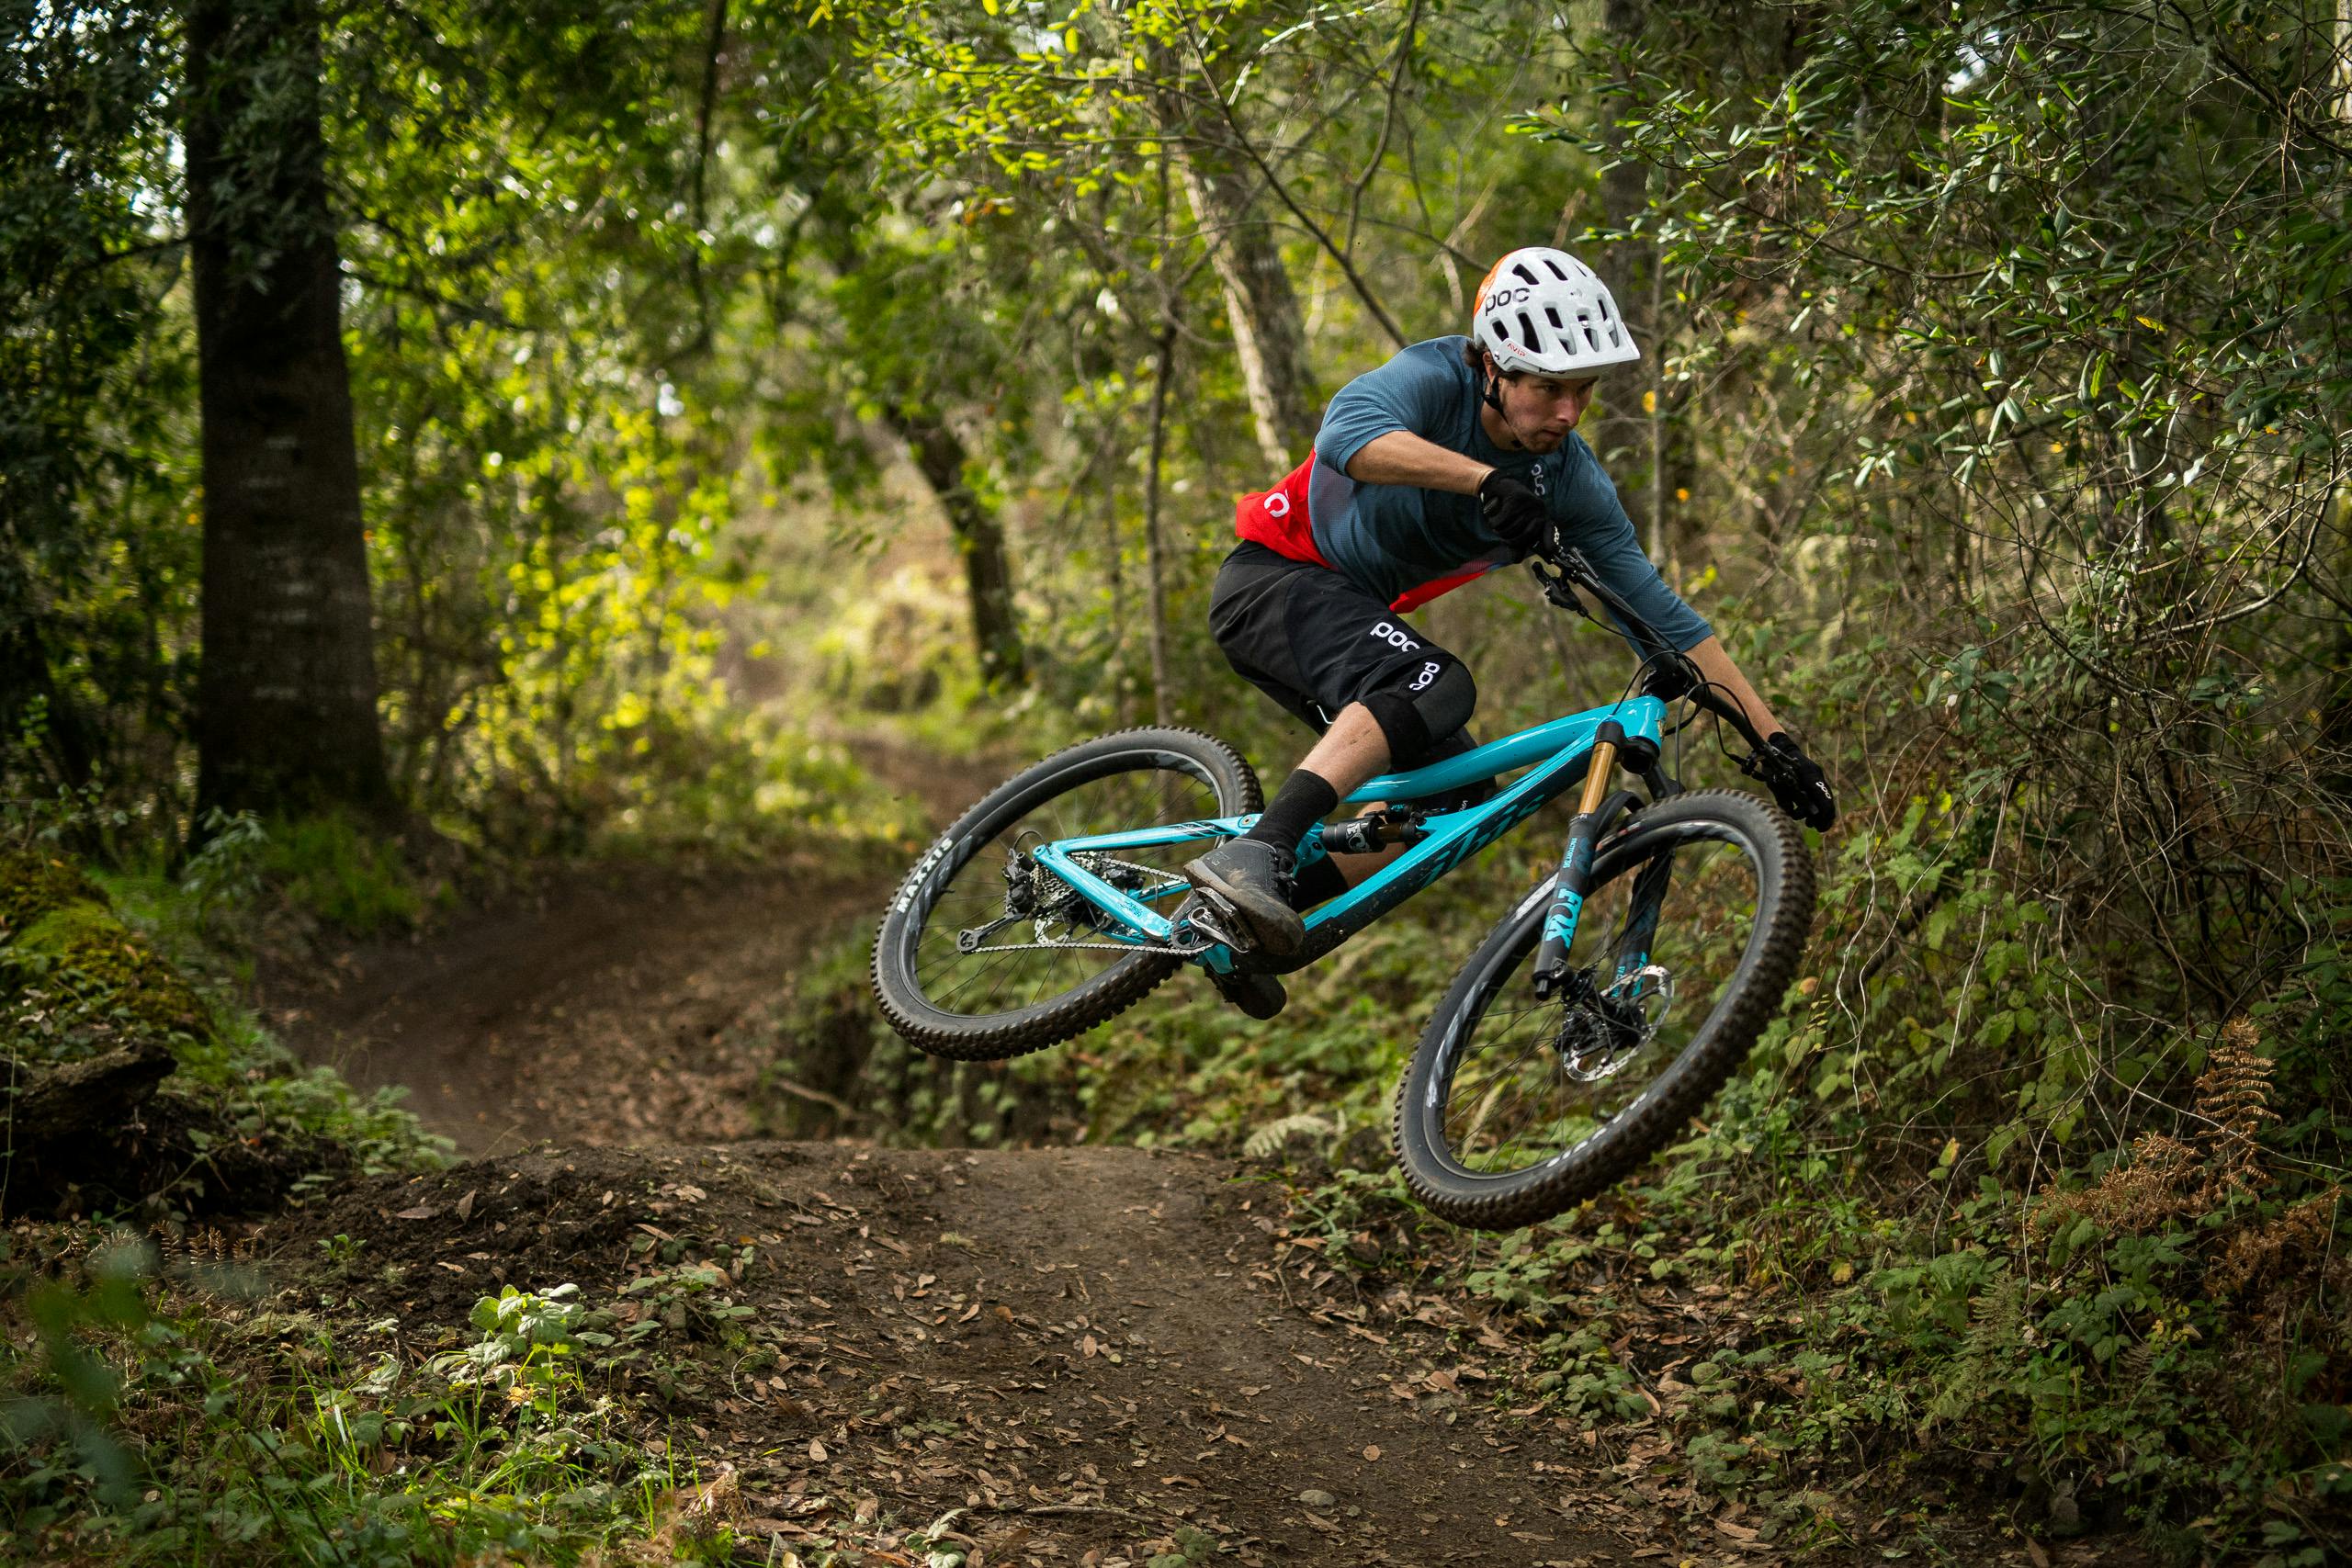 Man on a turquoise mountain bike rounding a bend in the dirt forest path.